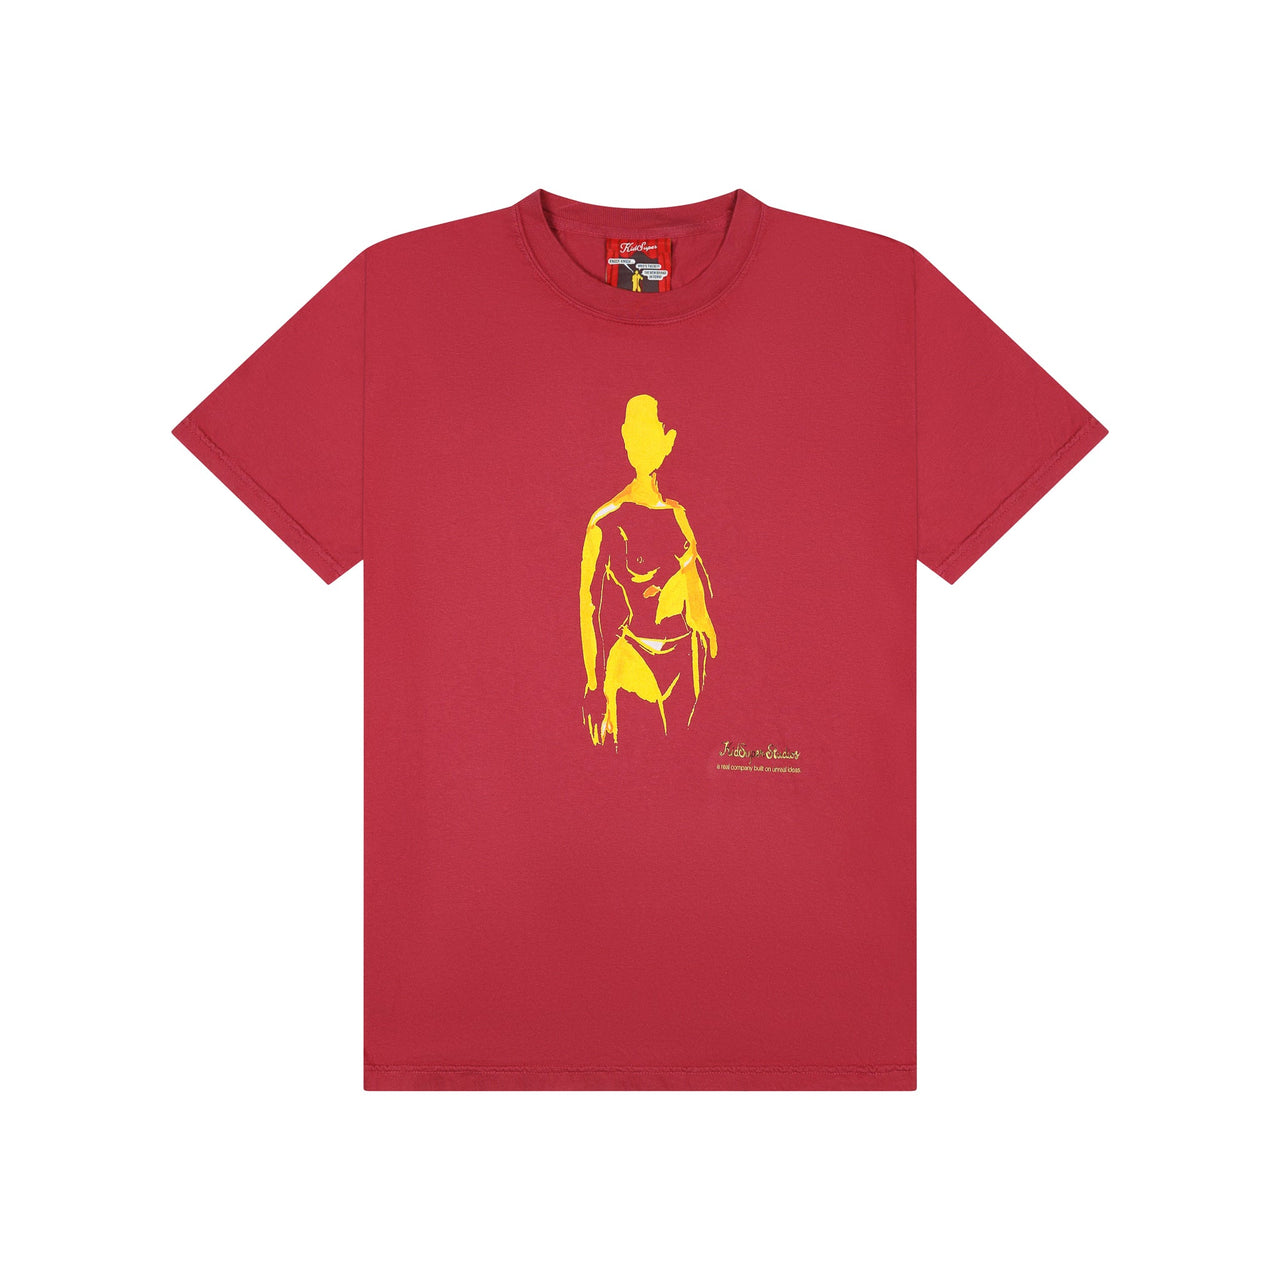 Painted Man Tee [Red]